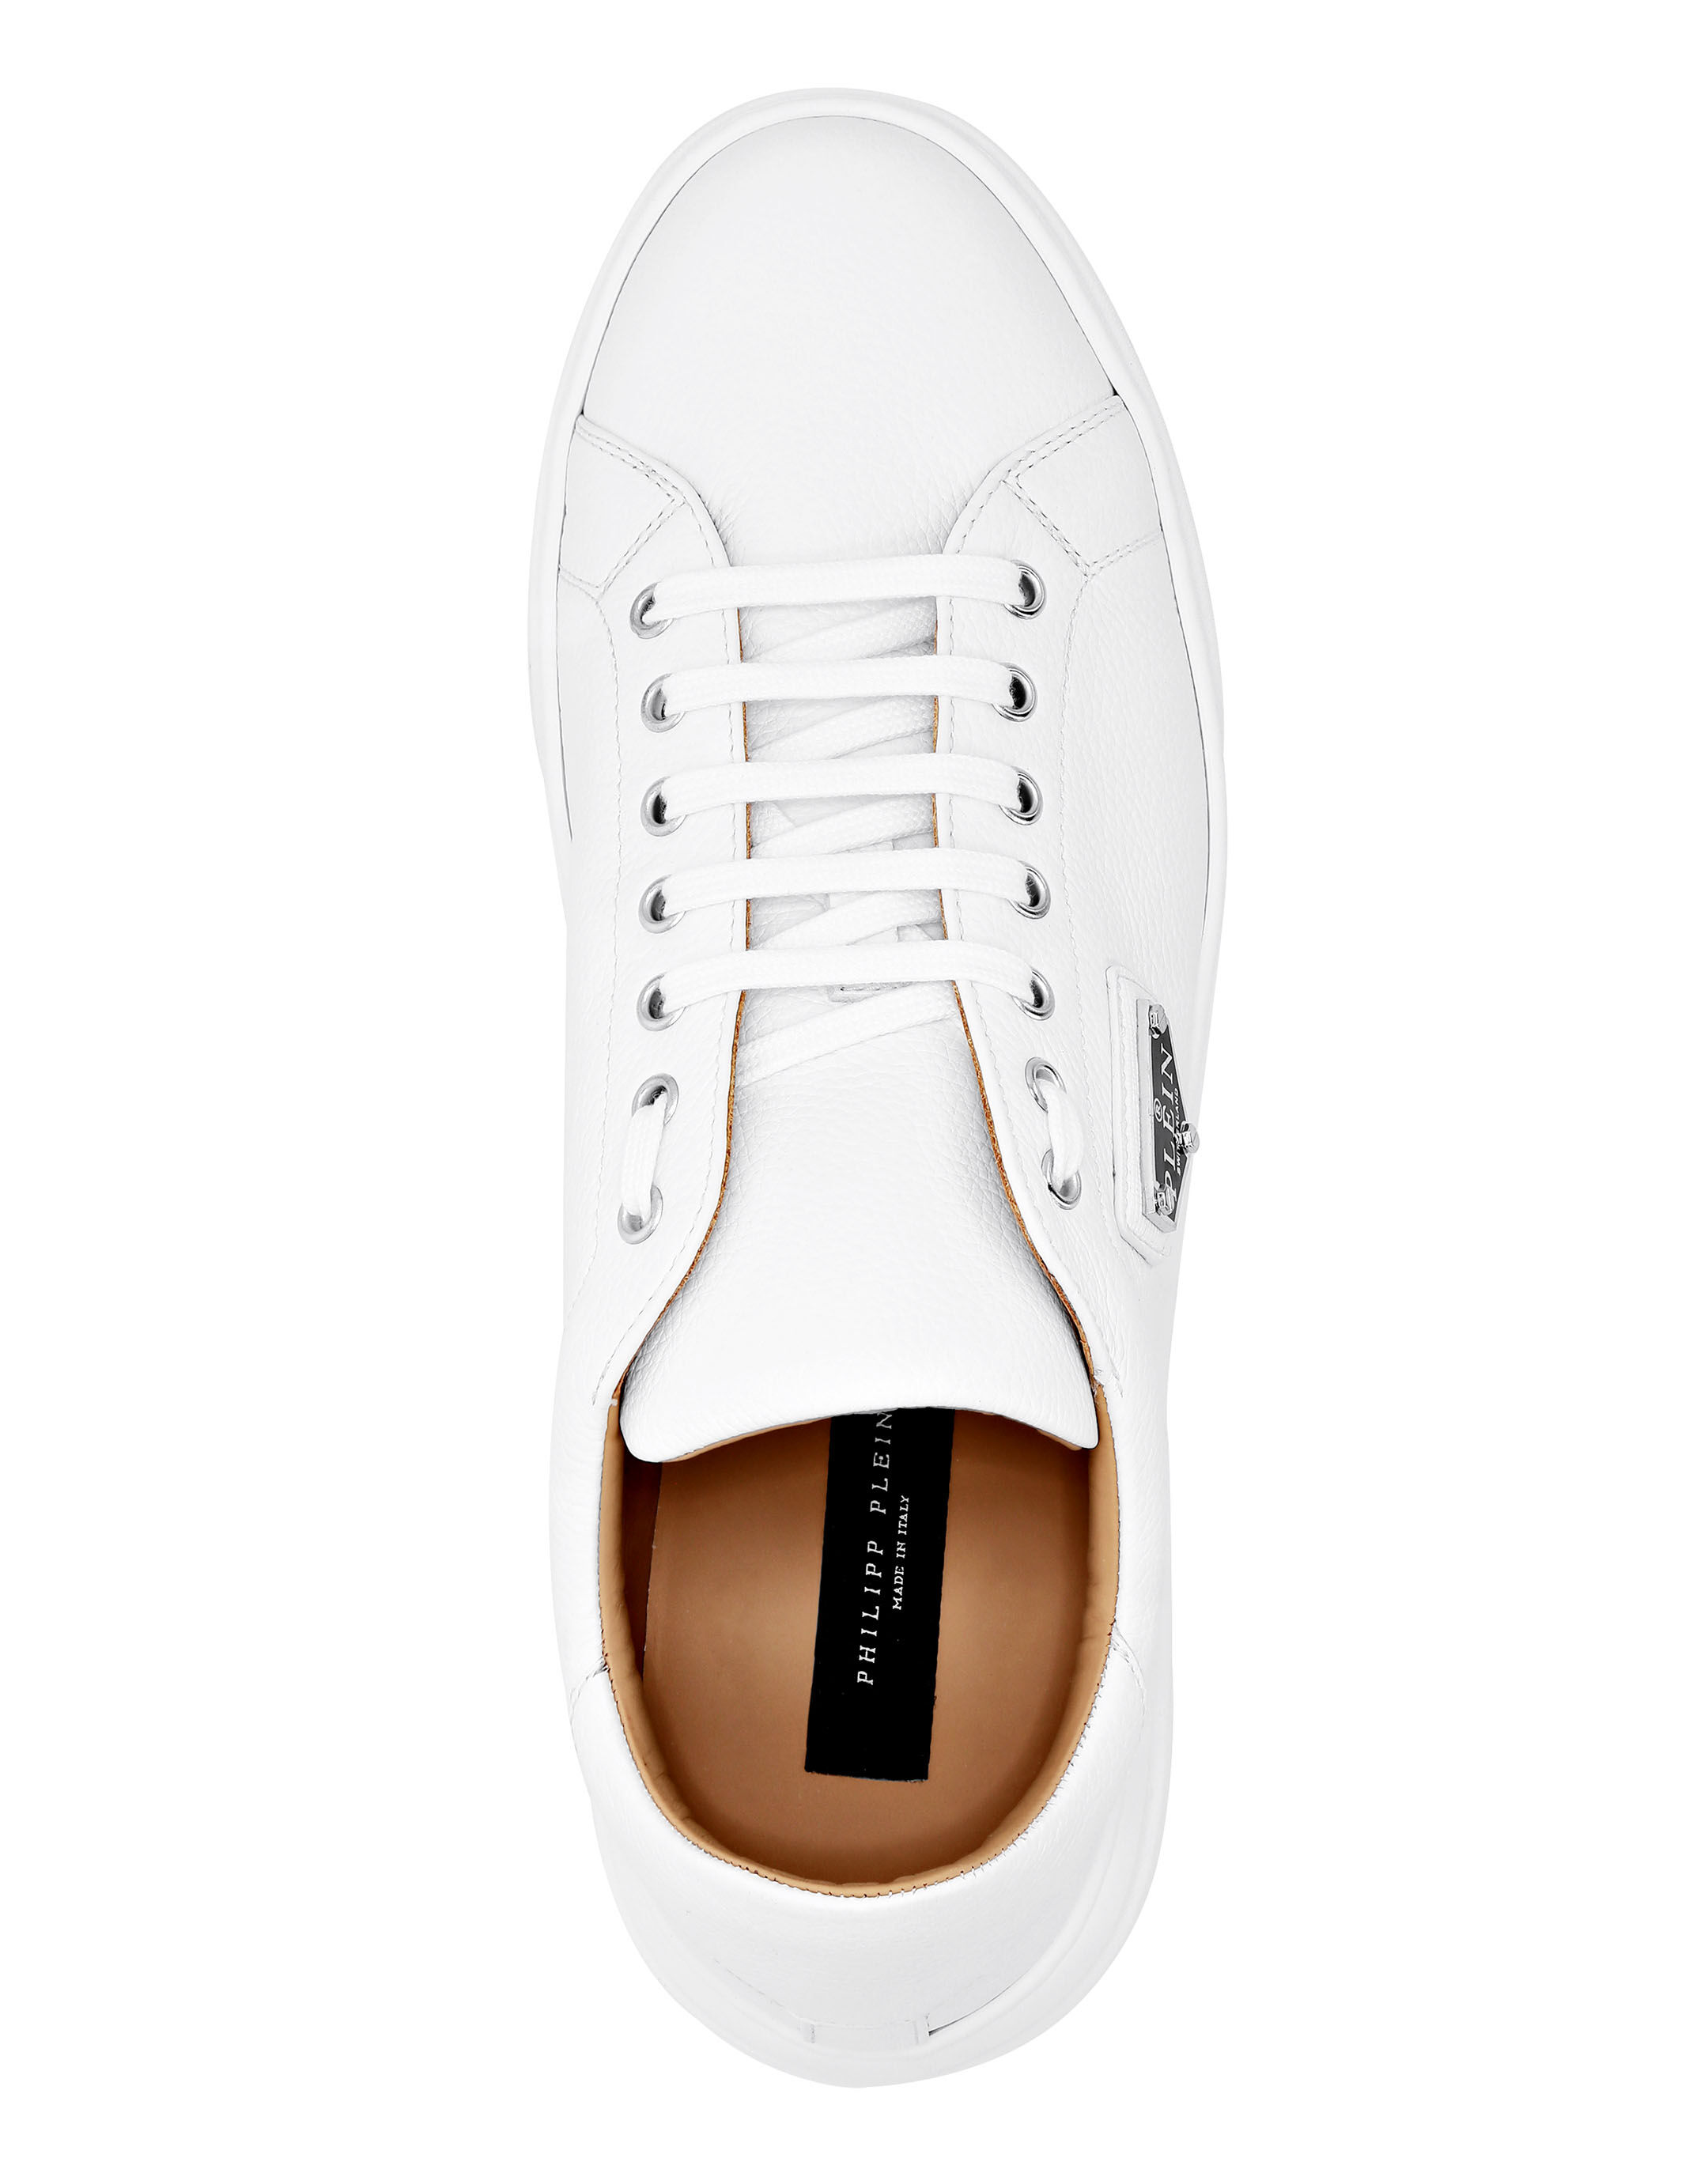 Tommy Hilfiger Men MODERN ICONIC COURT Cupsole Sneaker: Buy Online at Best  Price in UAE - Amazon.ae